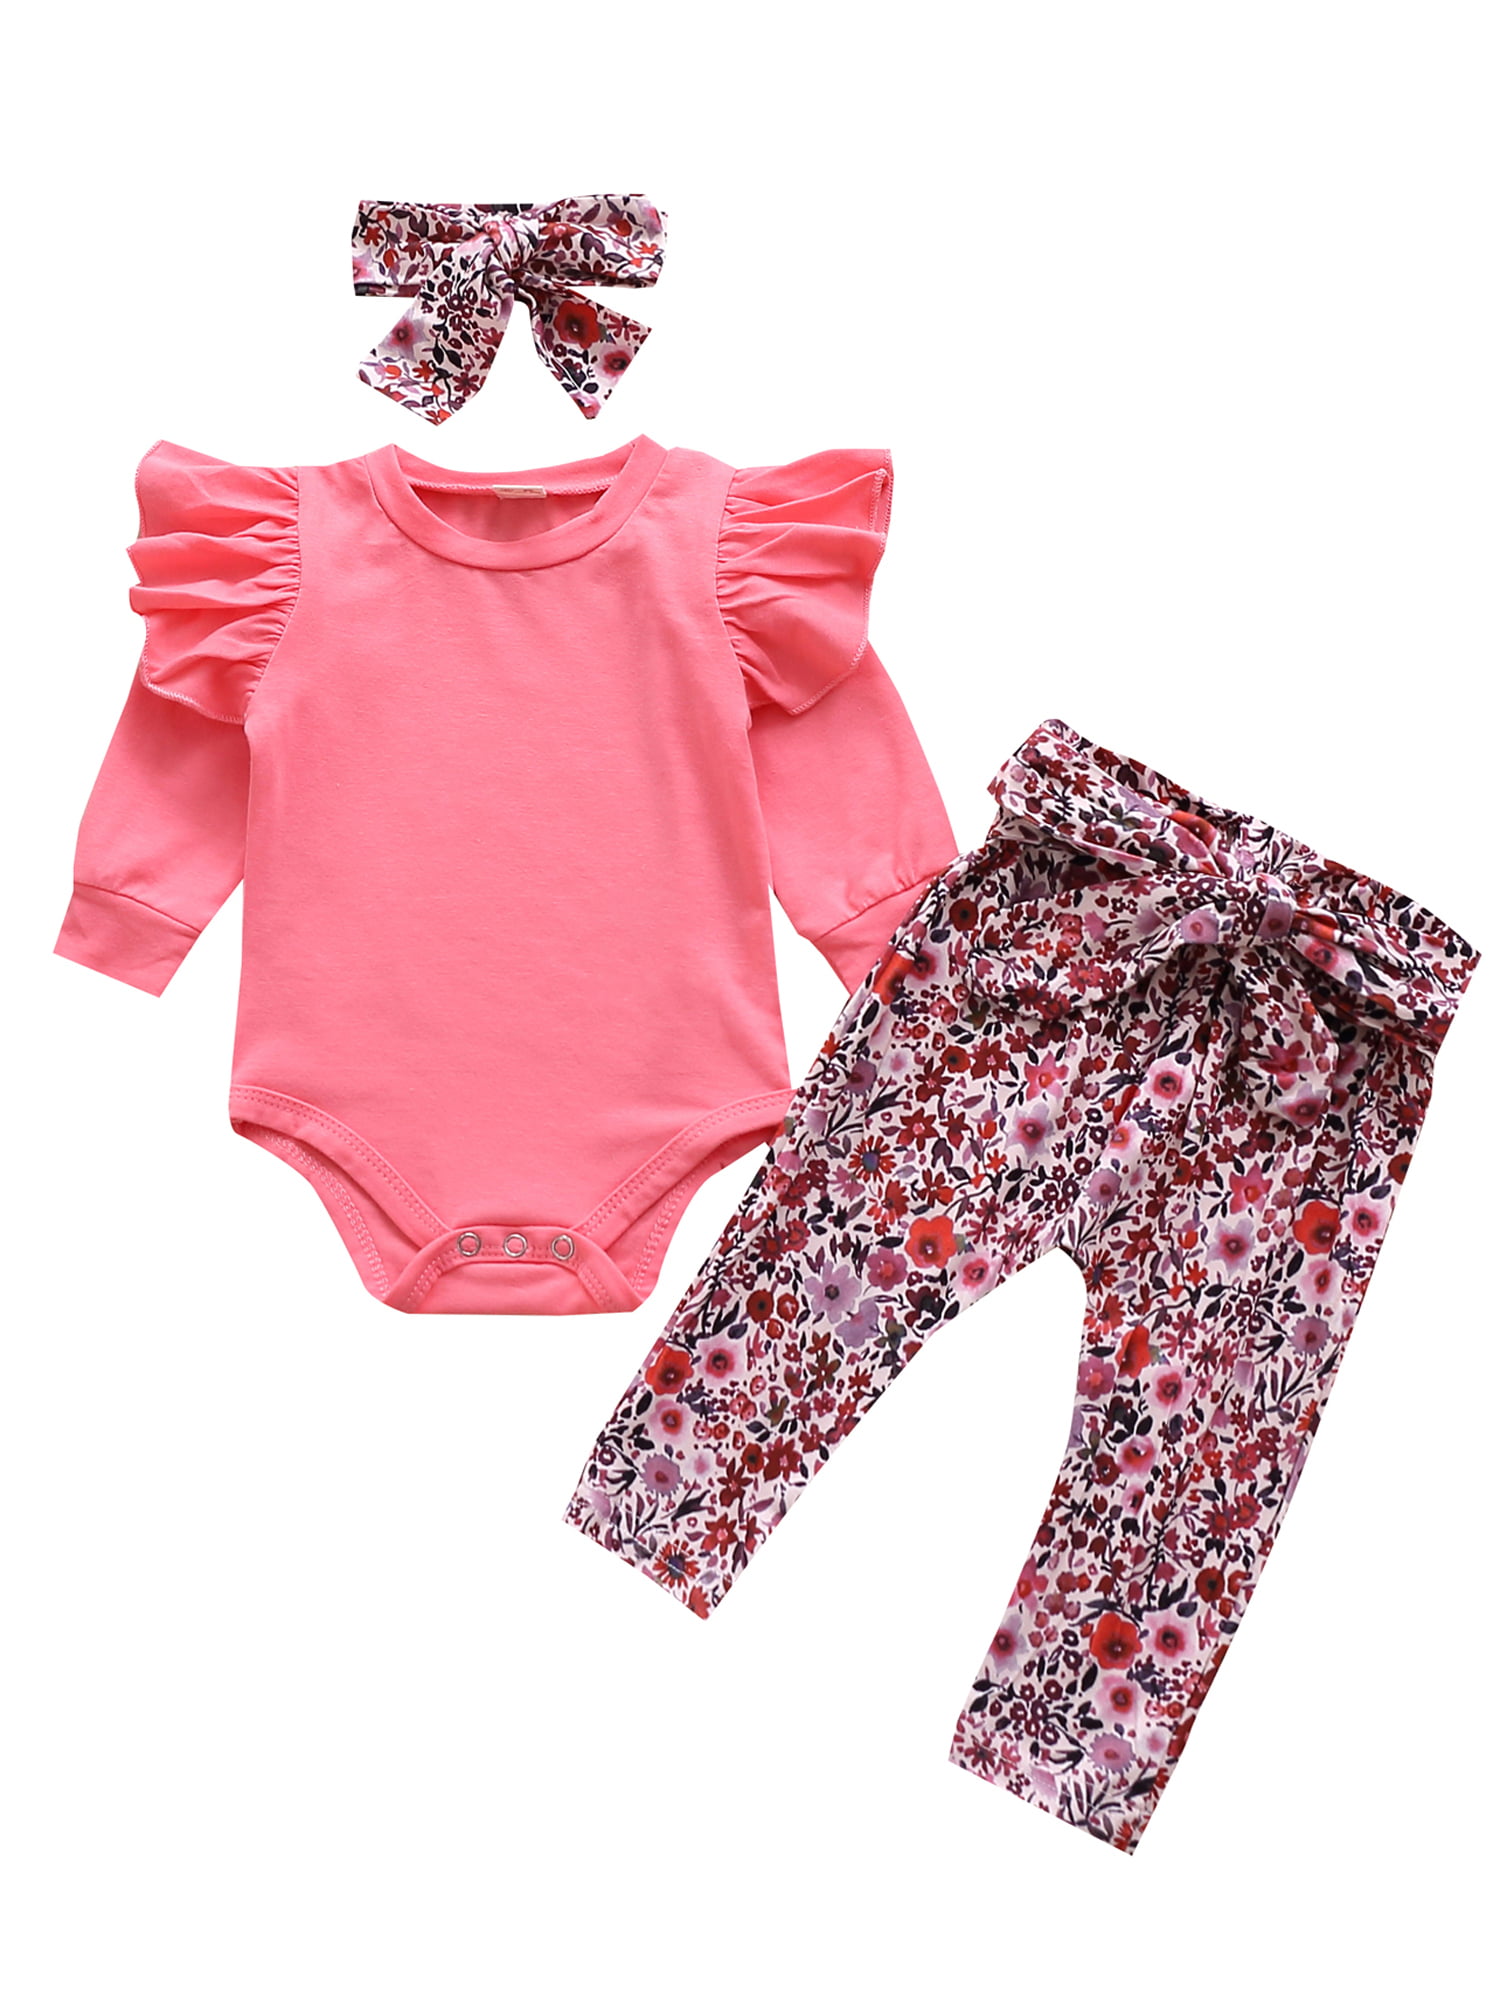 3PCS Set Toddler Kid Baby Girl LongSleeve Romper Top+Floral Pants Outfit Clothes 